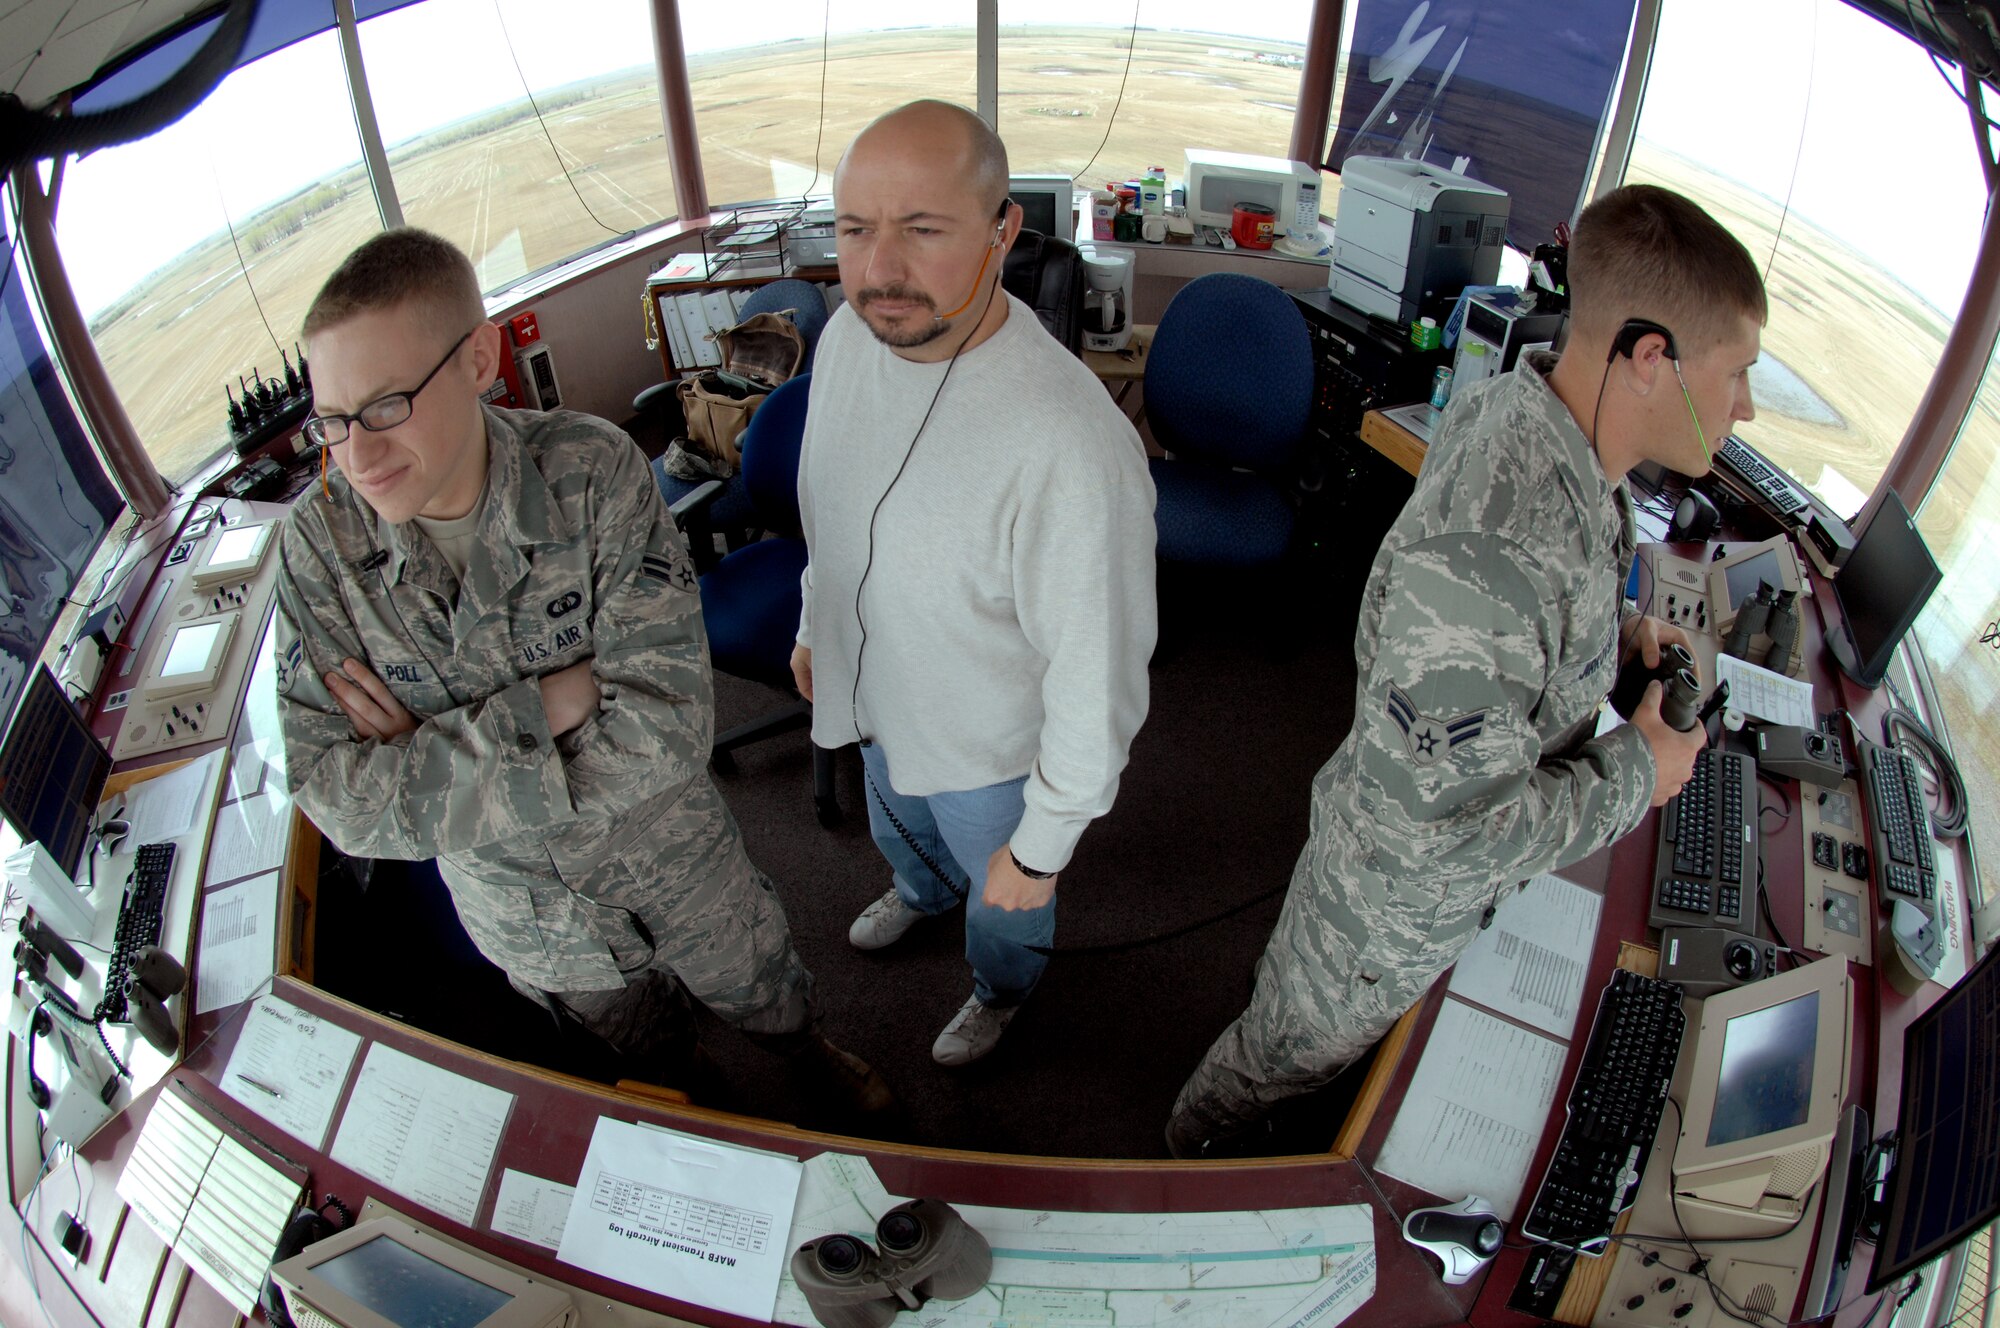 MINOT AIR FORCE BASE, N.D. --(left to right ) Airman 1st Class Mason Poll, air traffic control journeyman, Michael Porreca, ATC watch supervisor, and Airman 1st Class Thomas Jirkovsky, ATC apprentice, all from the 5th Operations Support Squadron, ensure clarity and safety of the flight line prior to a plane landing here May 12. Air traffic controllers operate air traffic systems to expedite and maintain a safe, orderly flow of air traffic as well as flight line activity. (U.S. Air Force photo by Senior Airman Jesse Lopez)